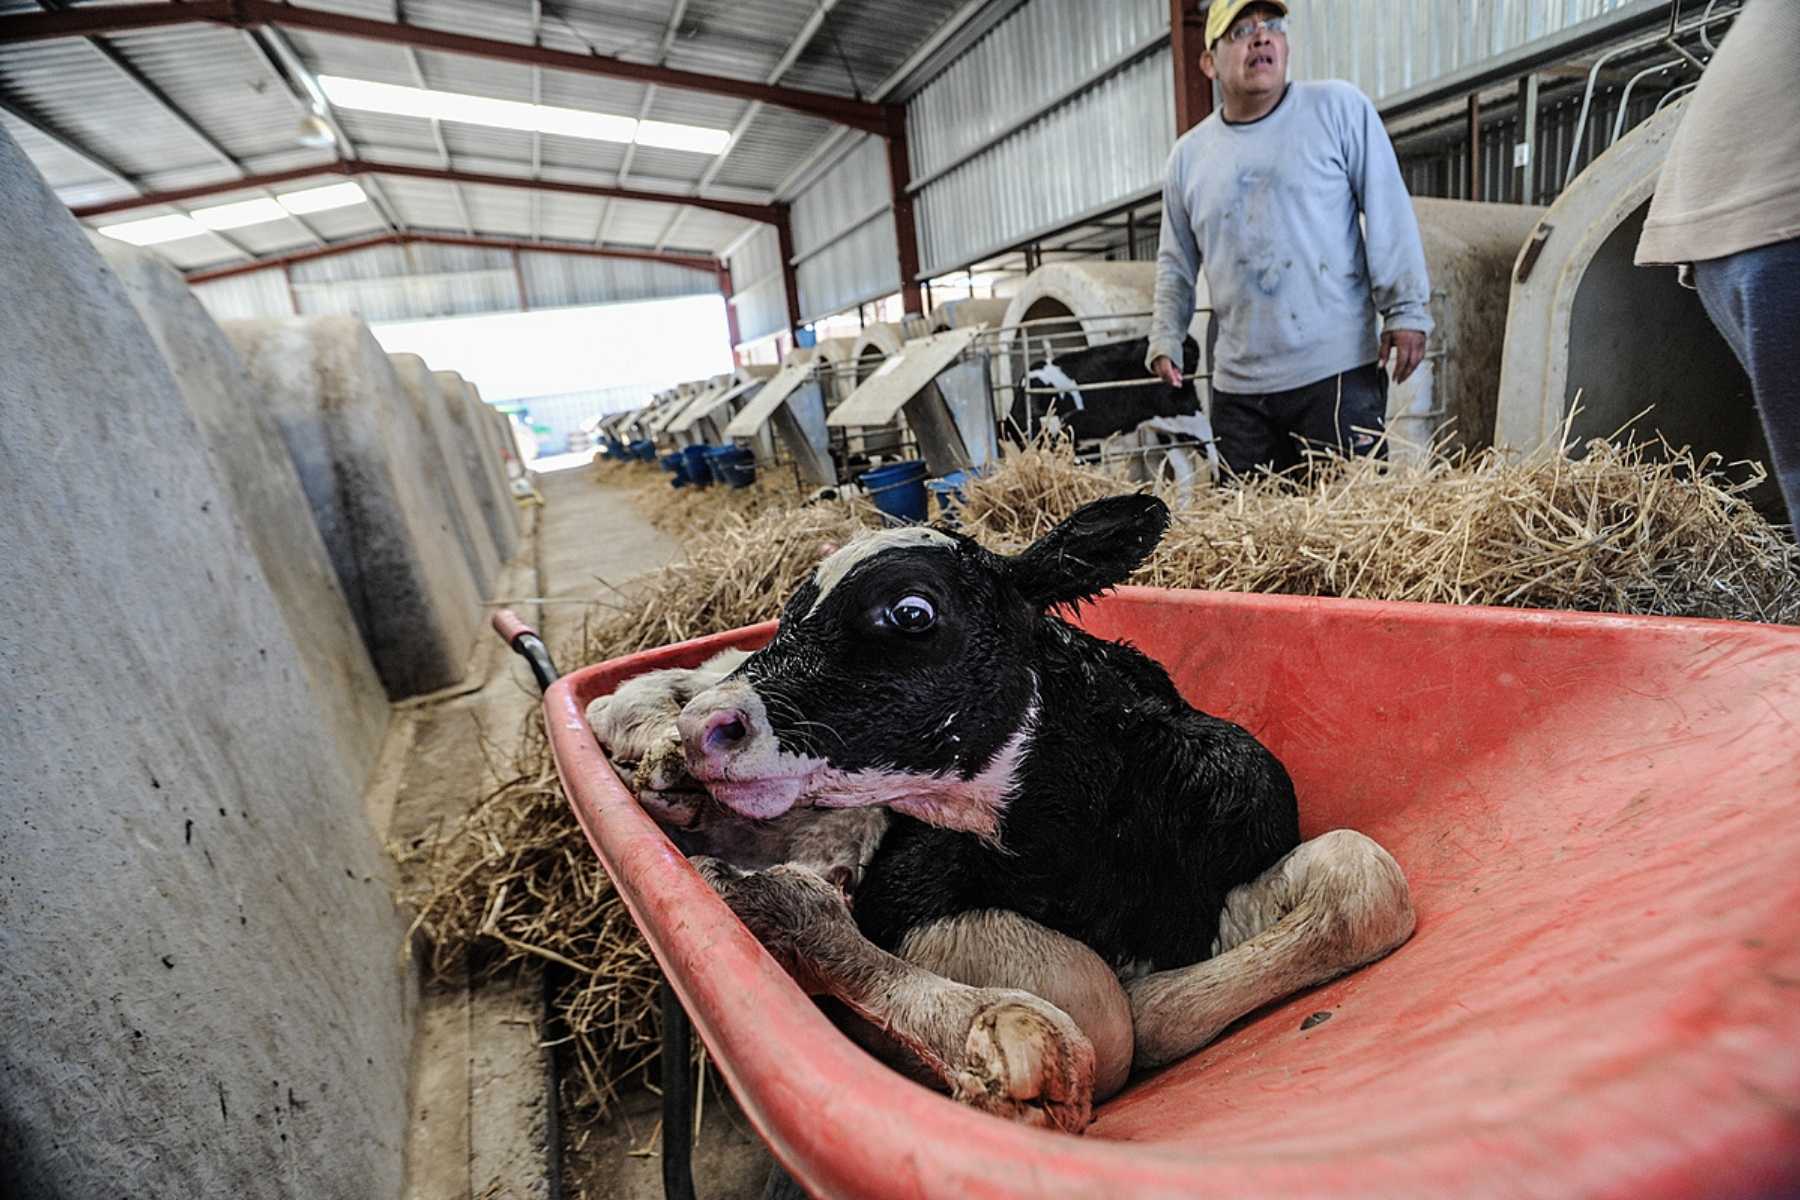 Still wet from birth, a calf is wheeled away from her mother to the veal crates at a dairy farm.